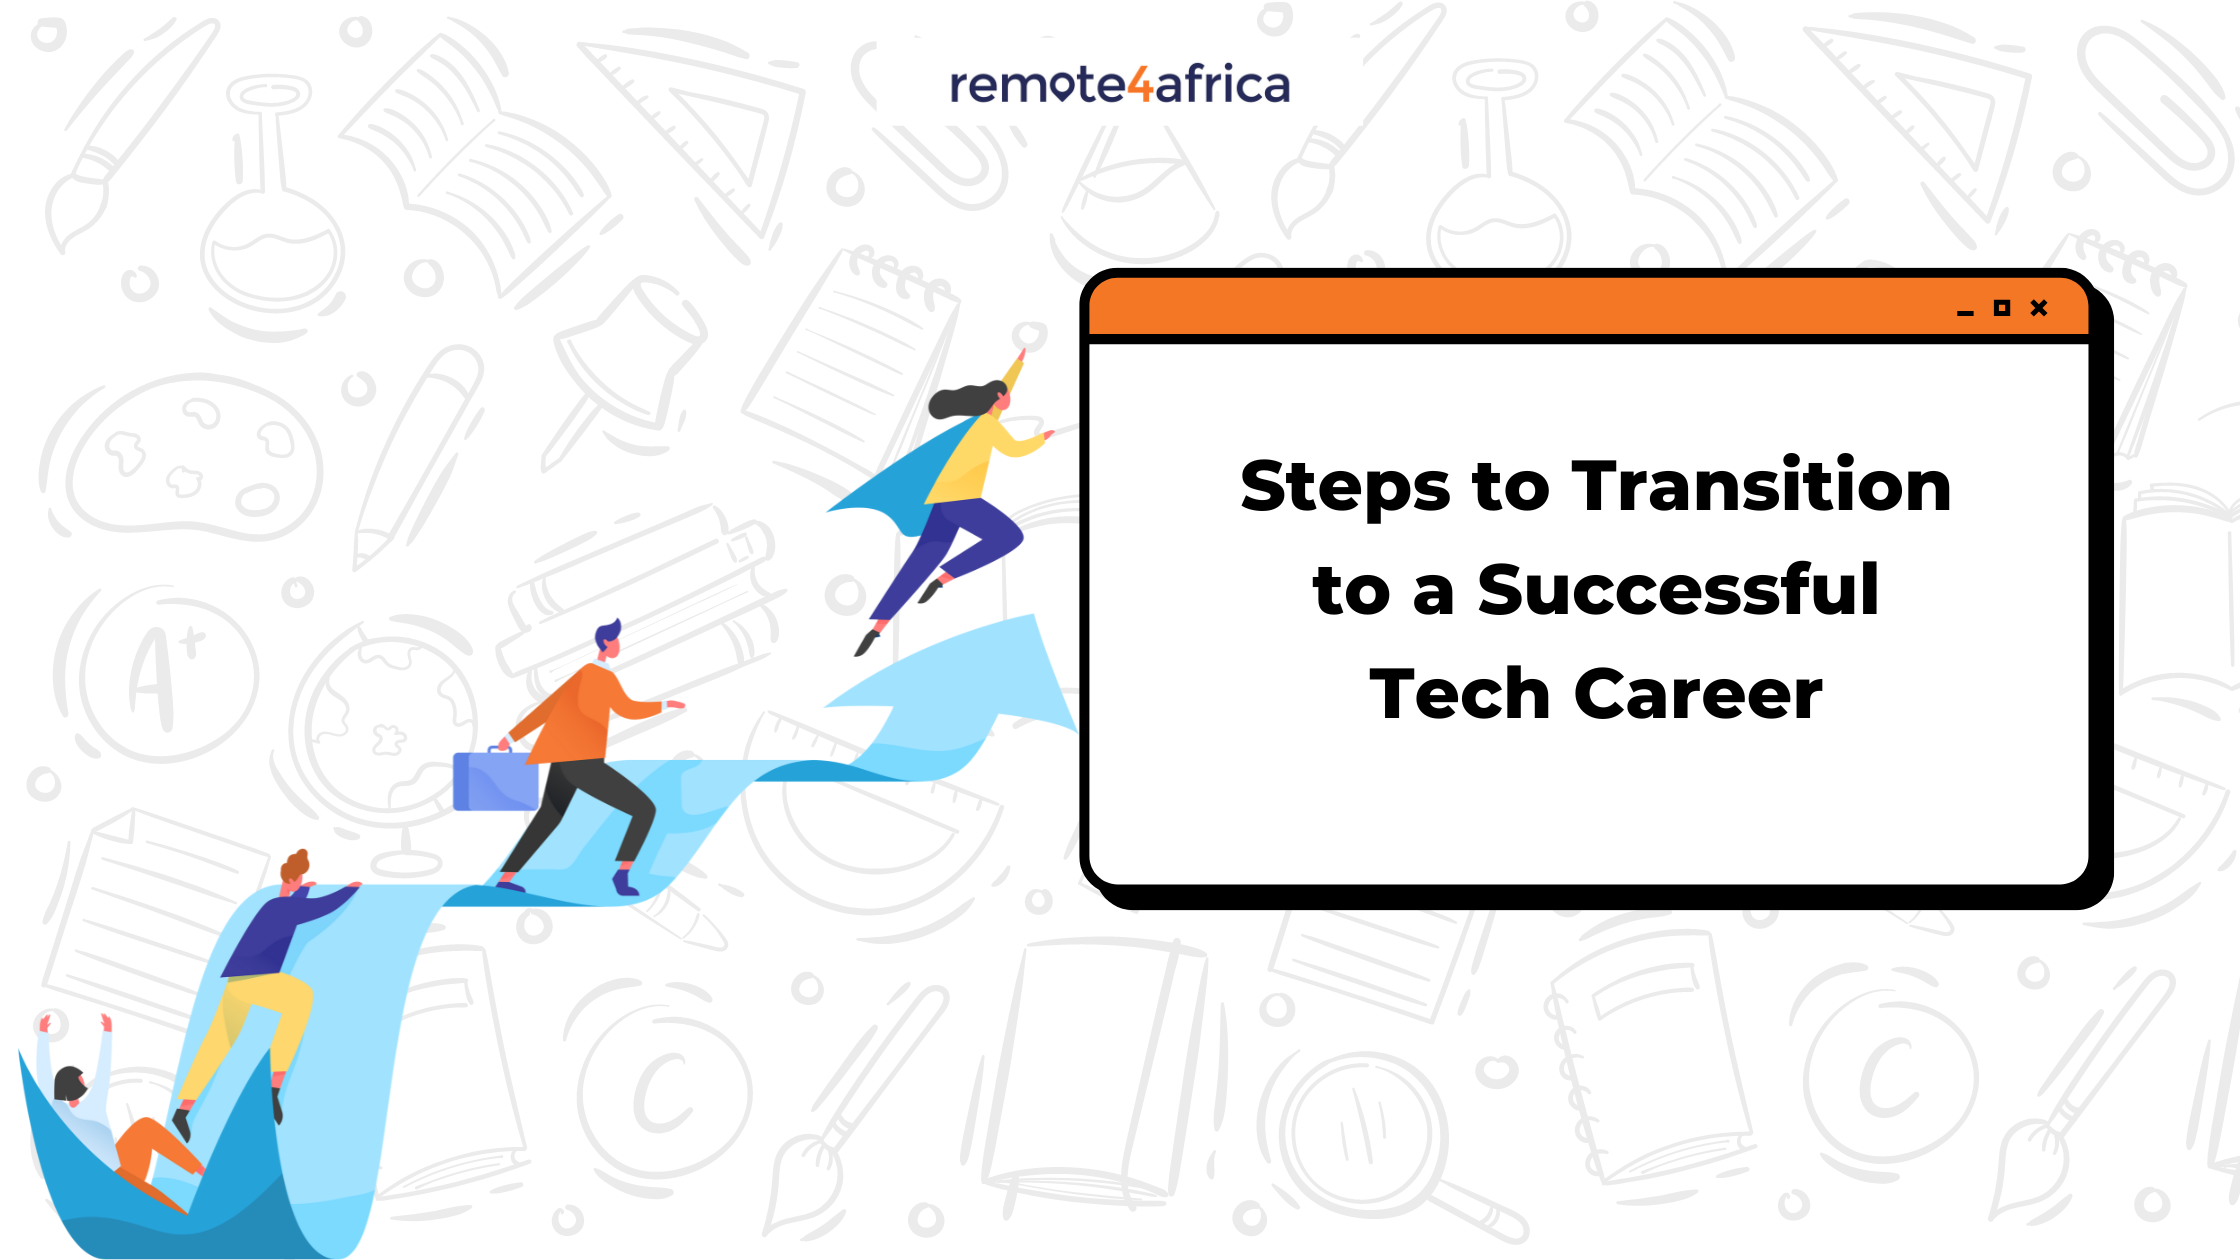 Steps to Transition to a Successful Tech Career